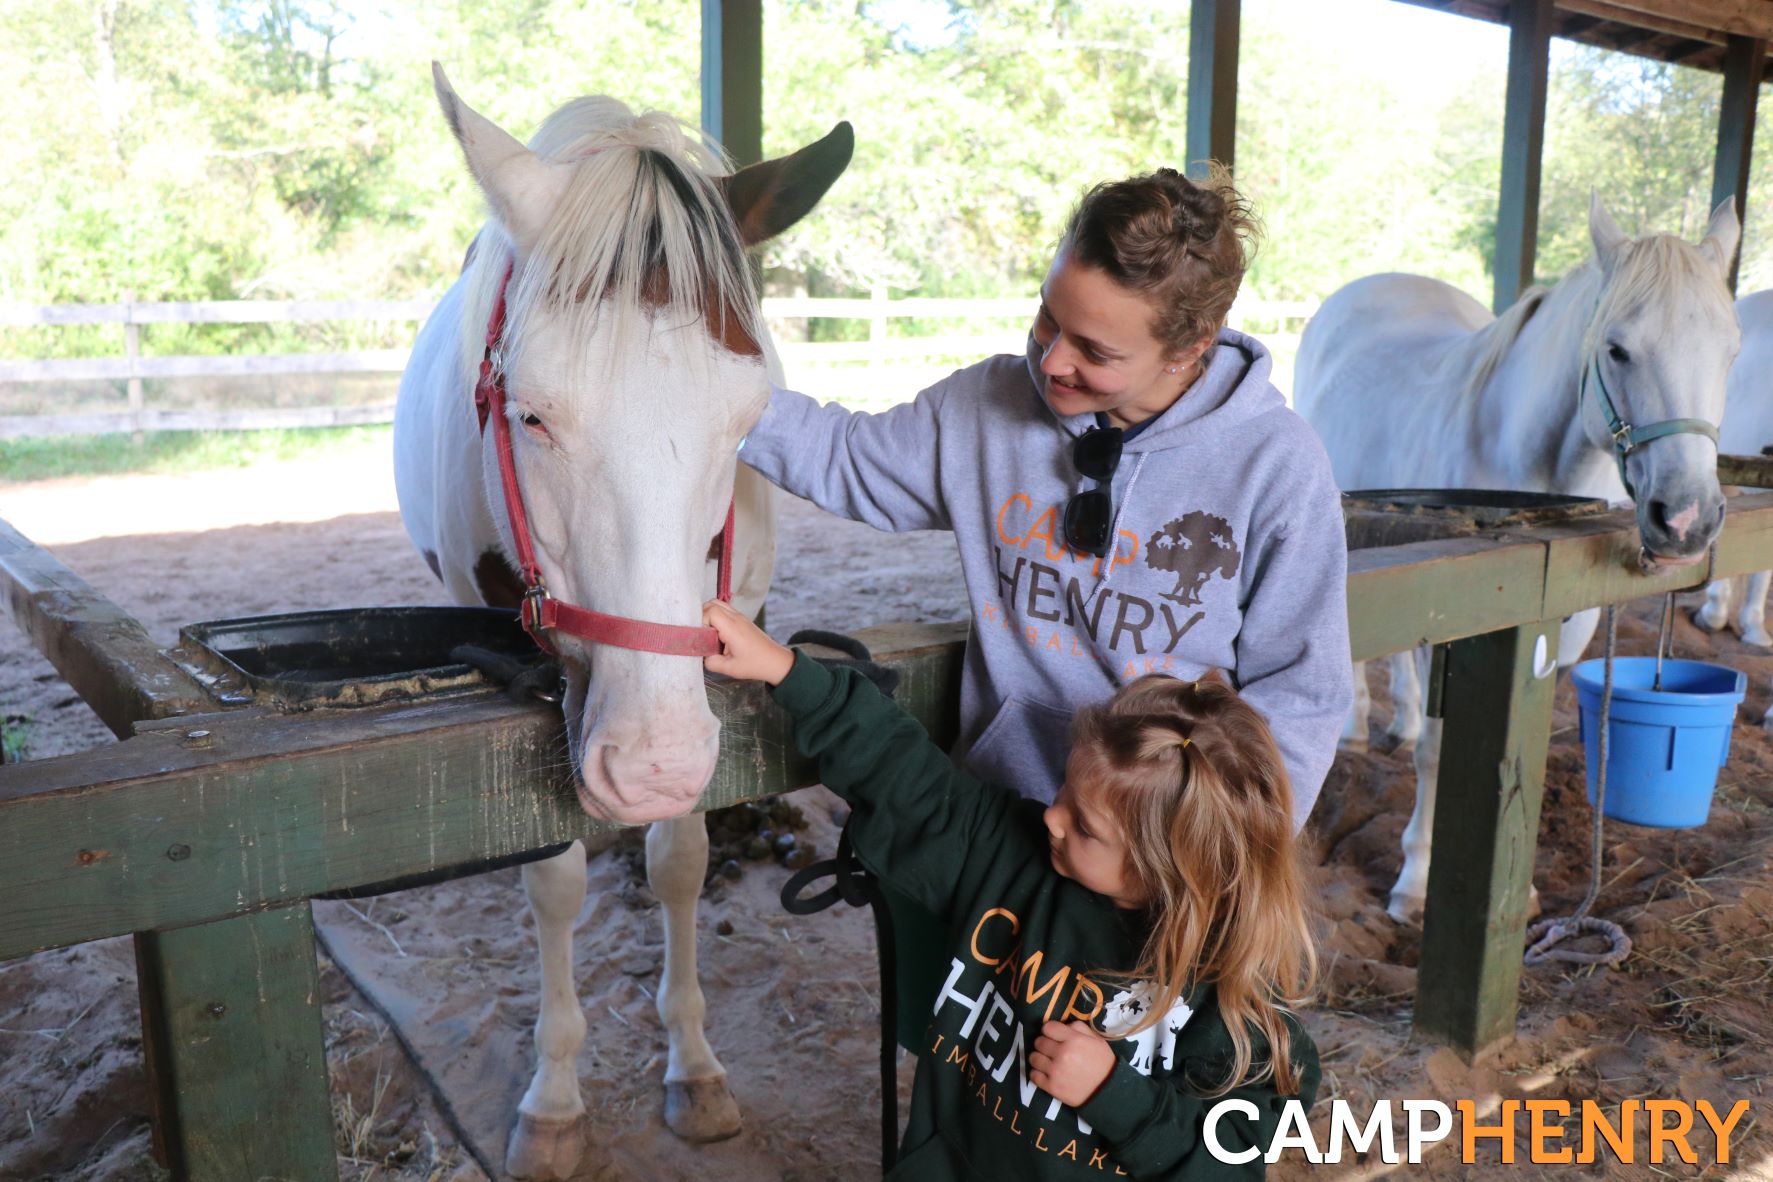 Mom and daughter petting a camp horse at Camp Henry